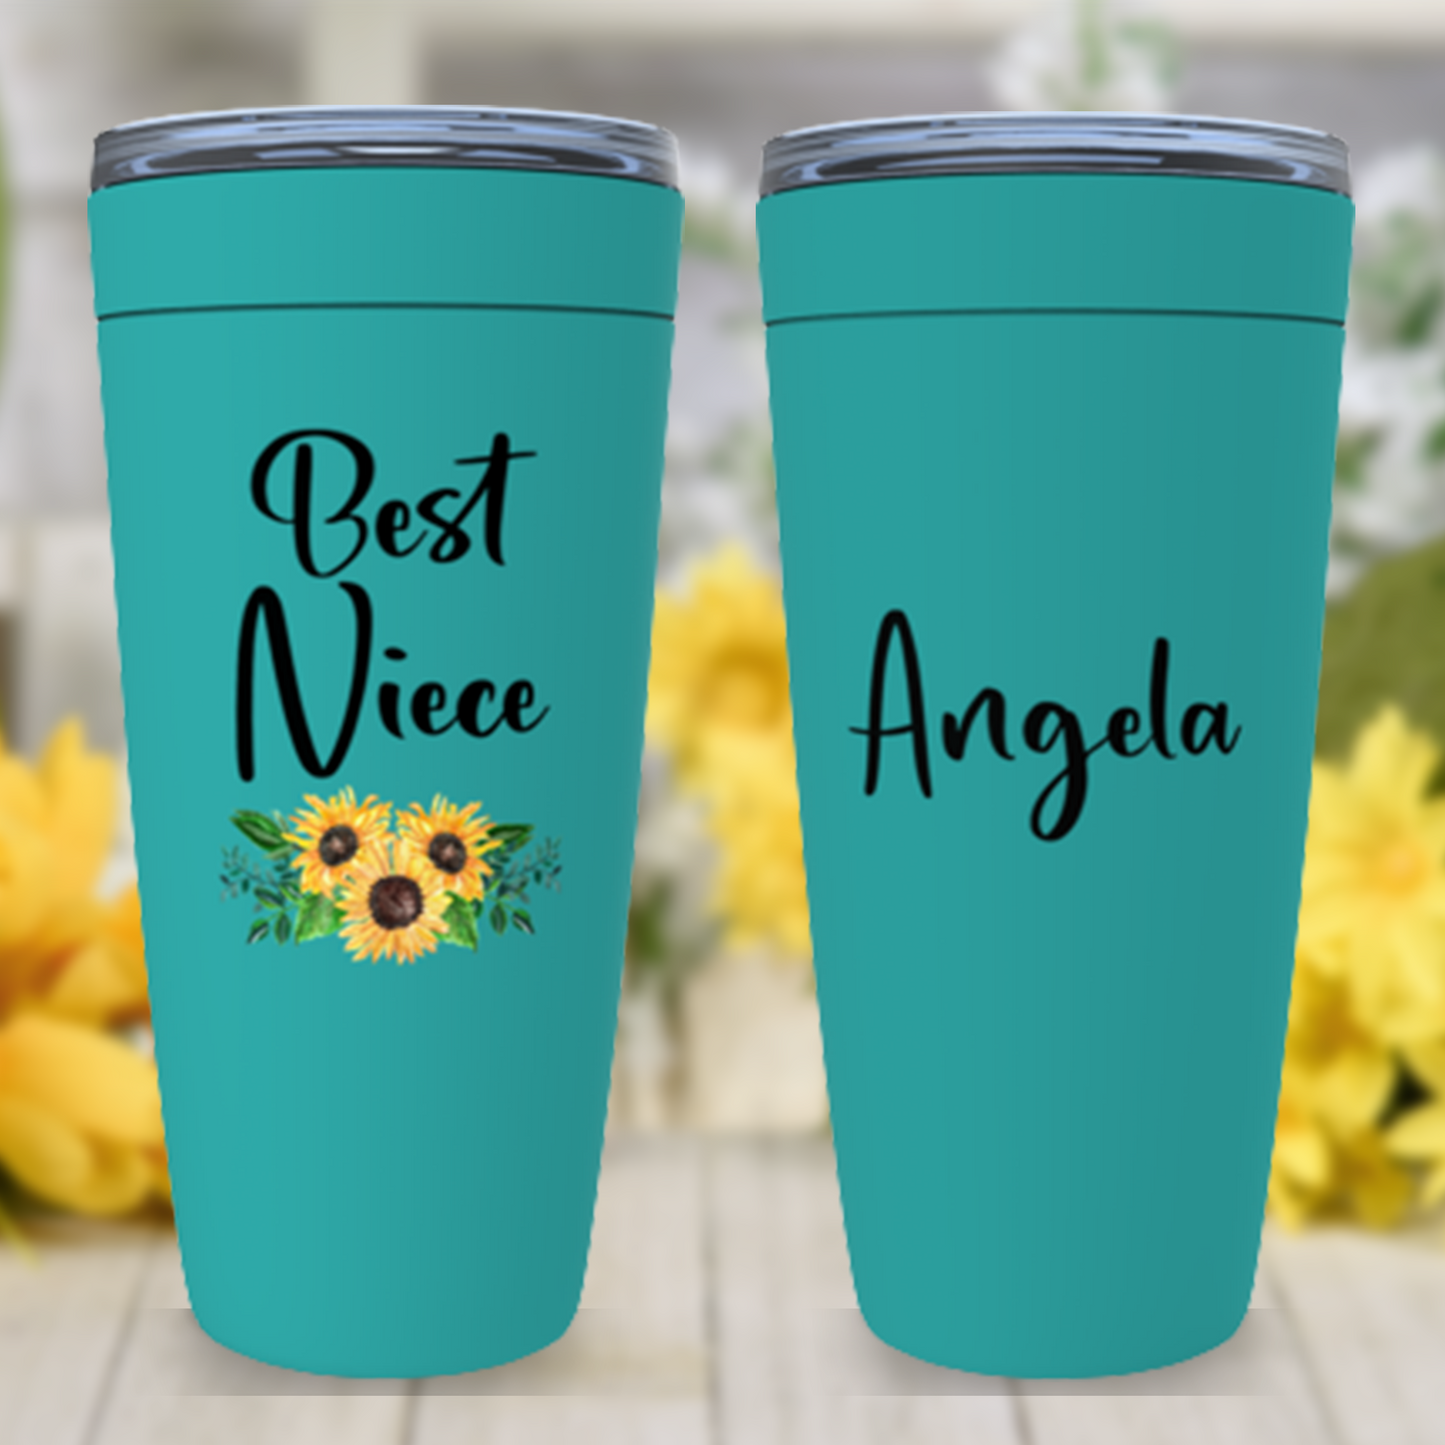 Niece Gift from Aunt, Best Niece Tumbler Personalized, Cute Sunflower Cup, Christmas or Birthday from Uncle, Custom Family Gift Ideas